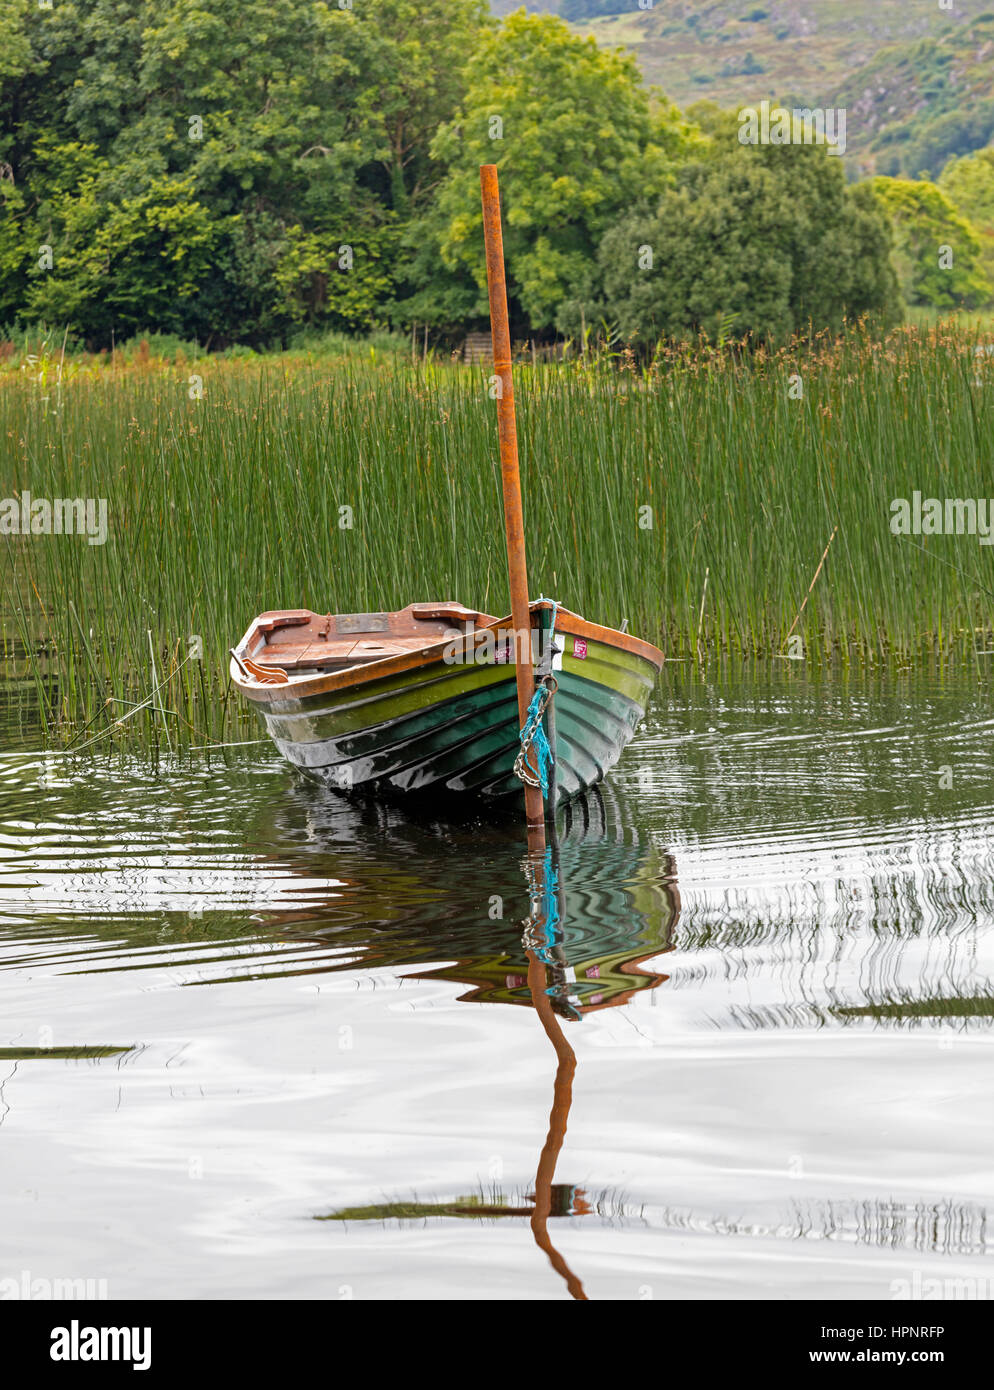 County Cork, Republic of Ireland. Eire. Rowing boat moored on Lough Allua.  This freshwater lake forms part of the Lee River. Stock Photo